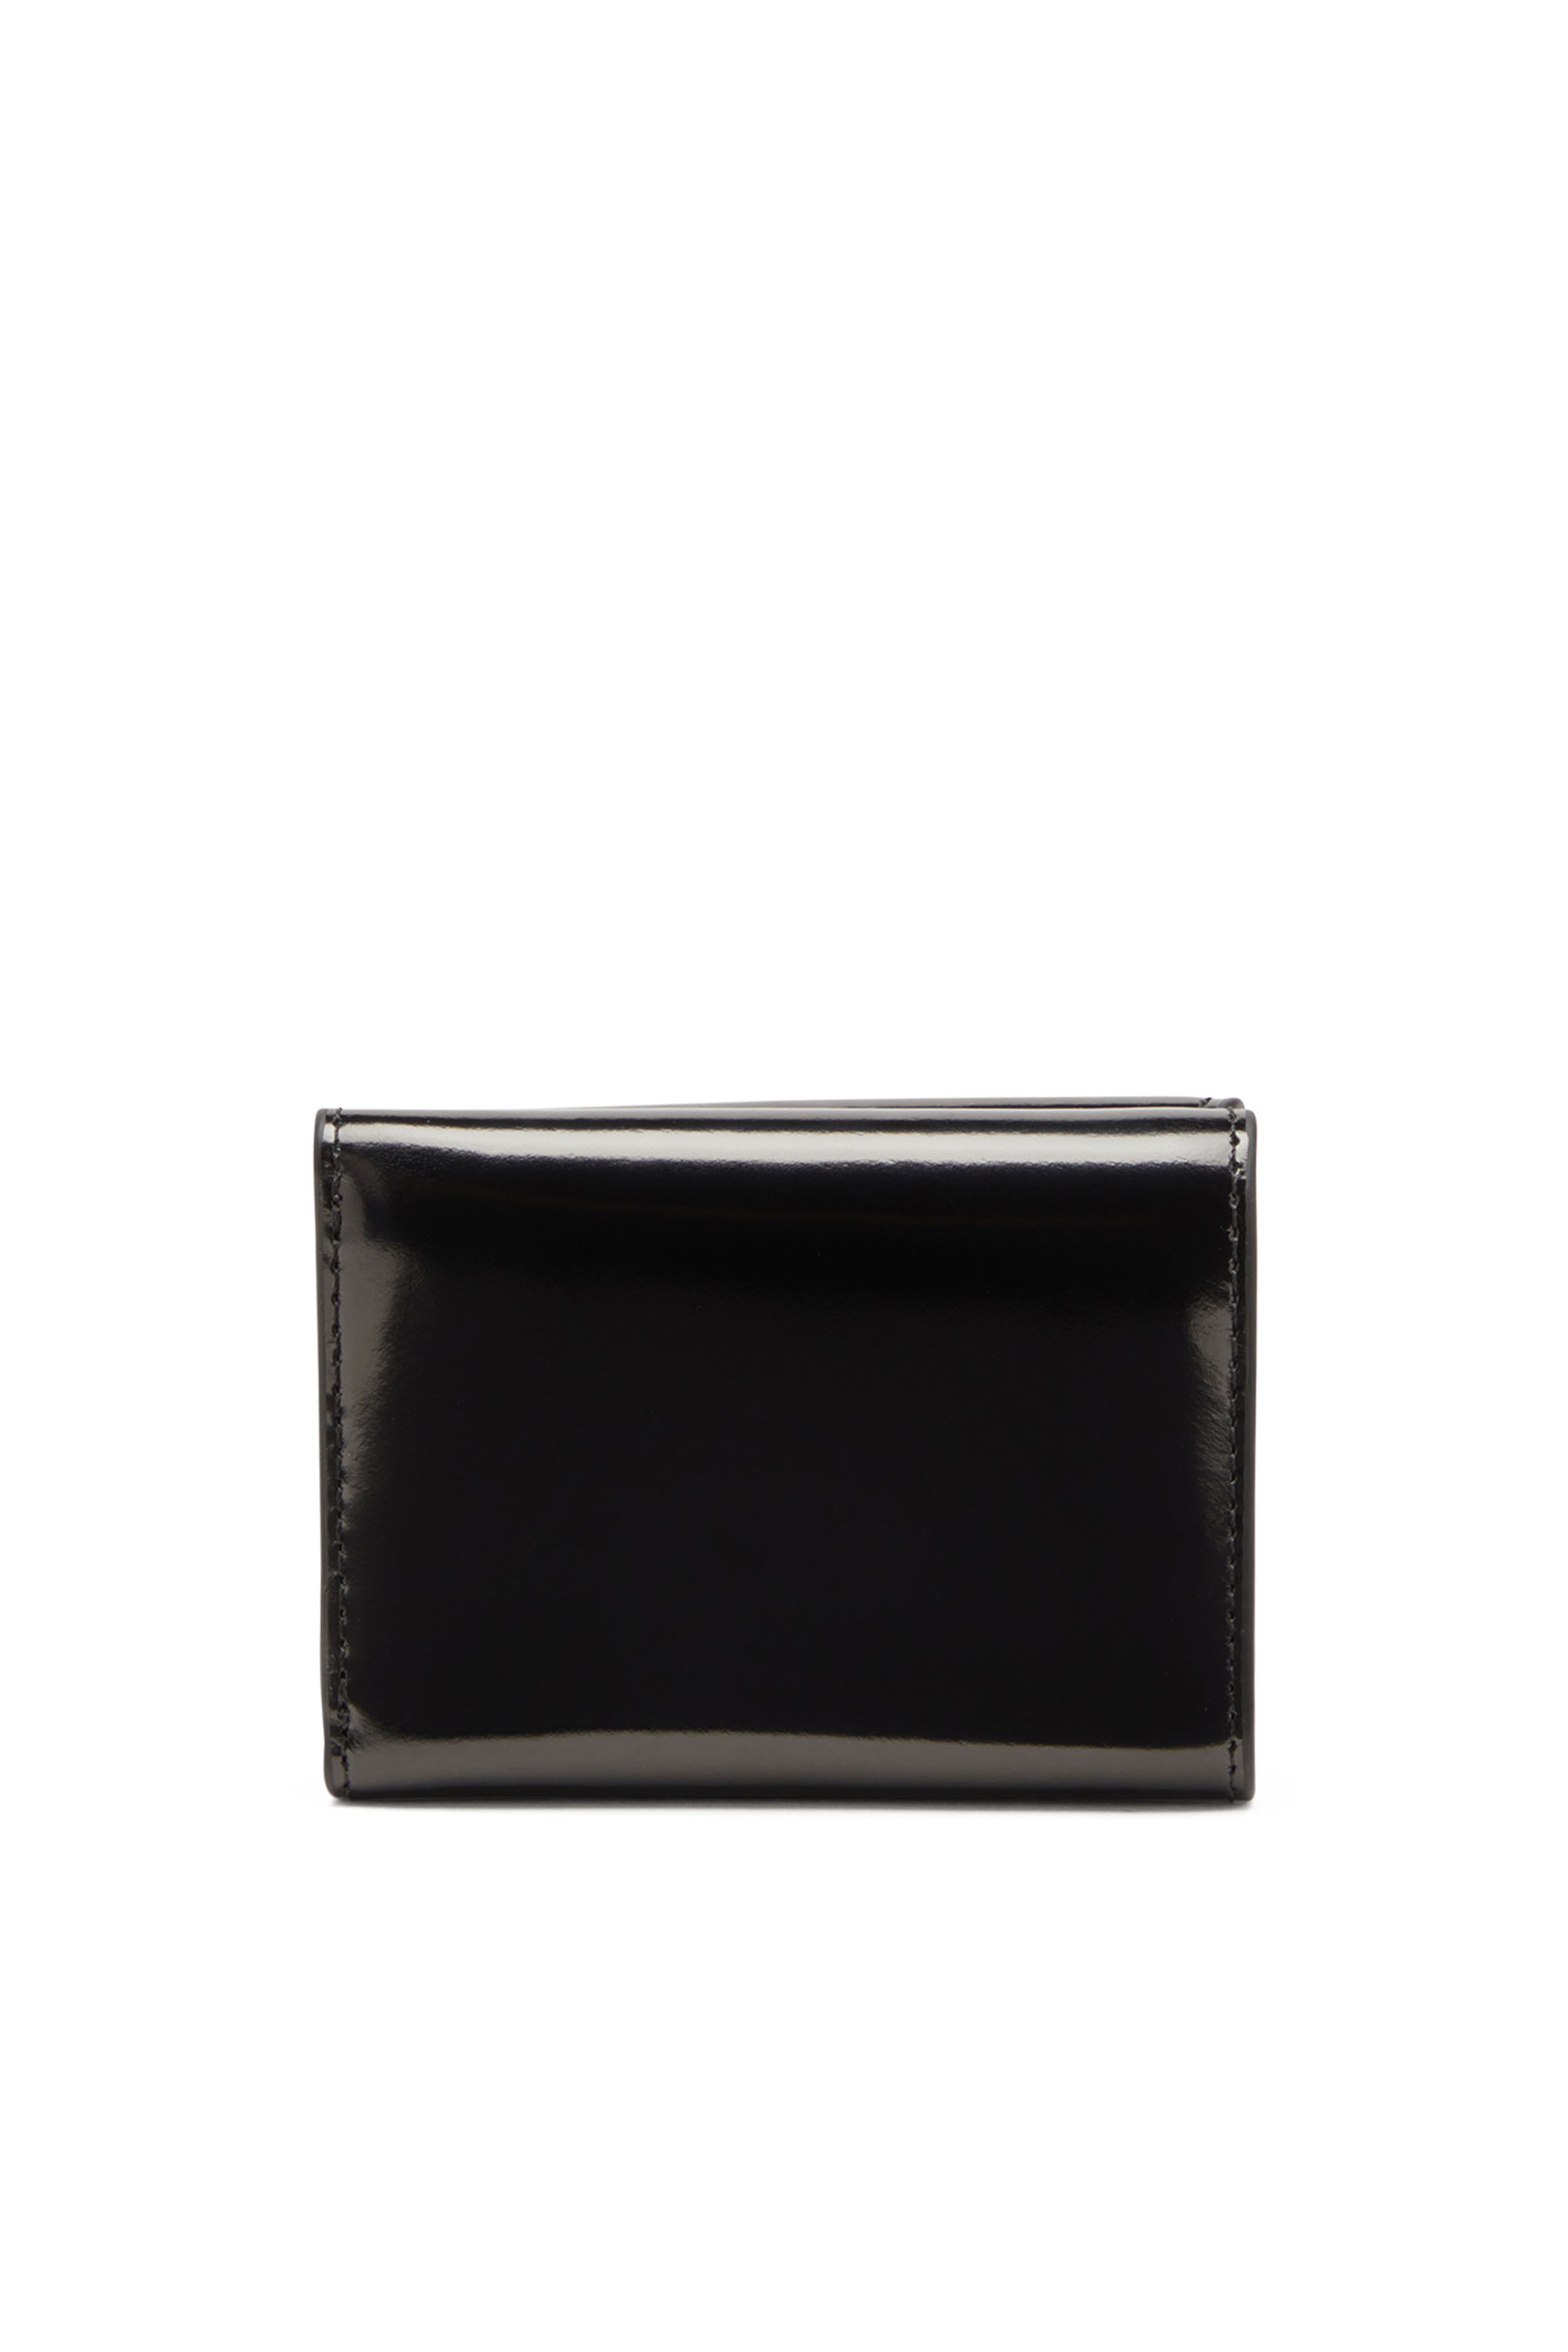 Diesel - 1DR TRI FOLD COIN XS II, Woman Tri-fold wallet in mirrored leather in Black - Image 3